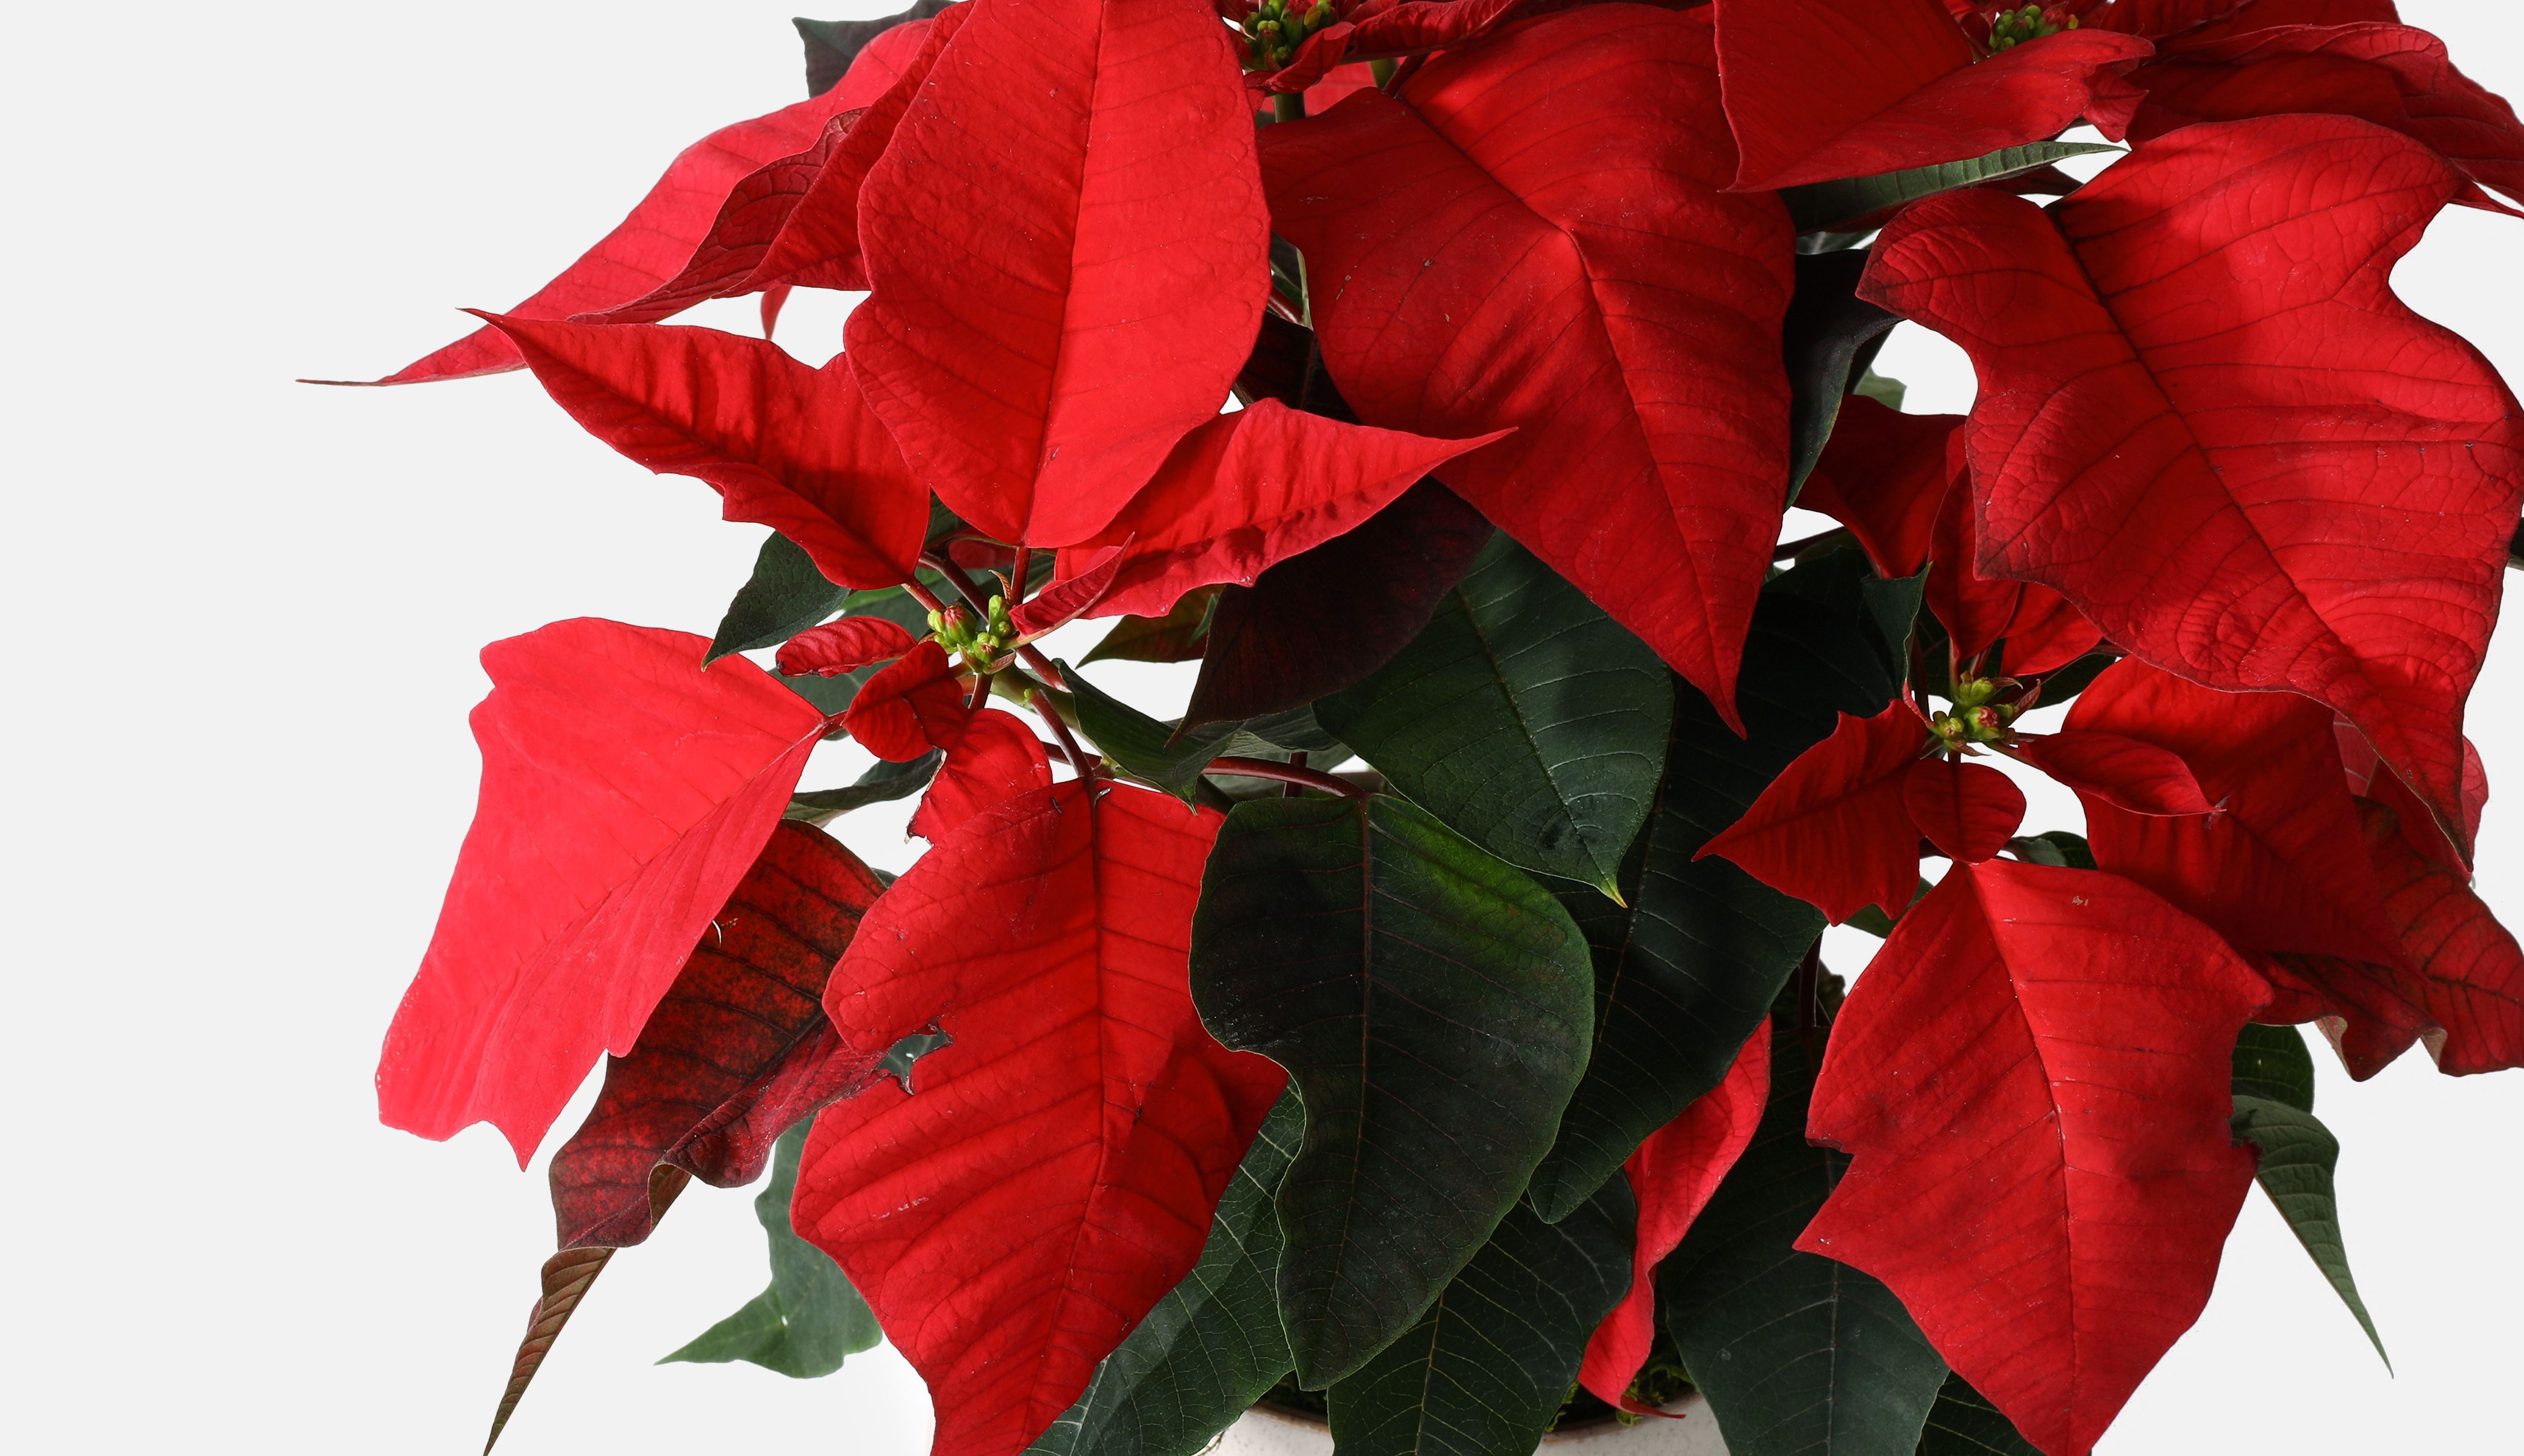 Close up of a Christmas poinsettia flower.